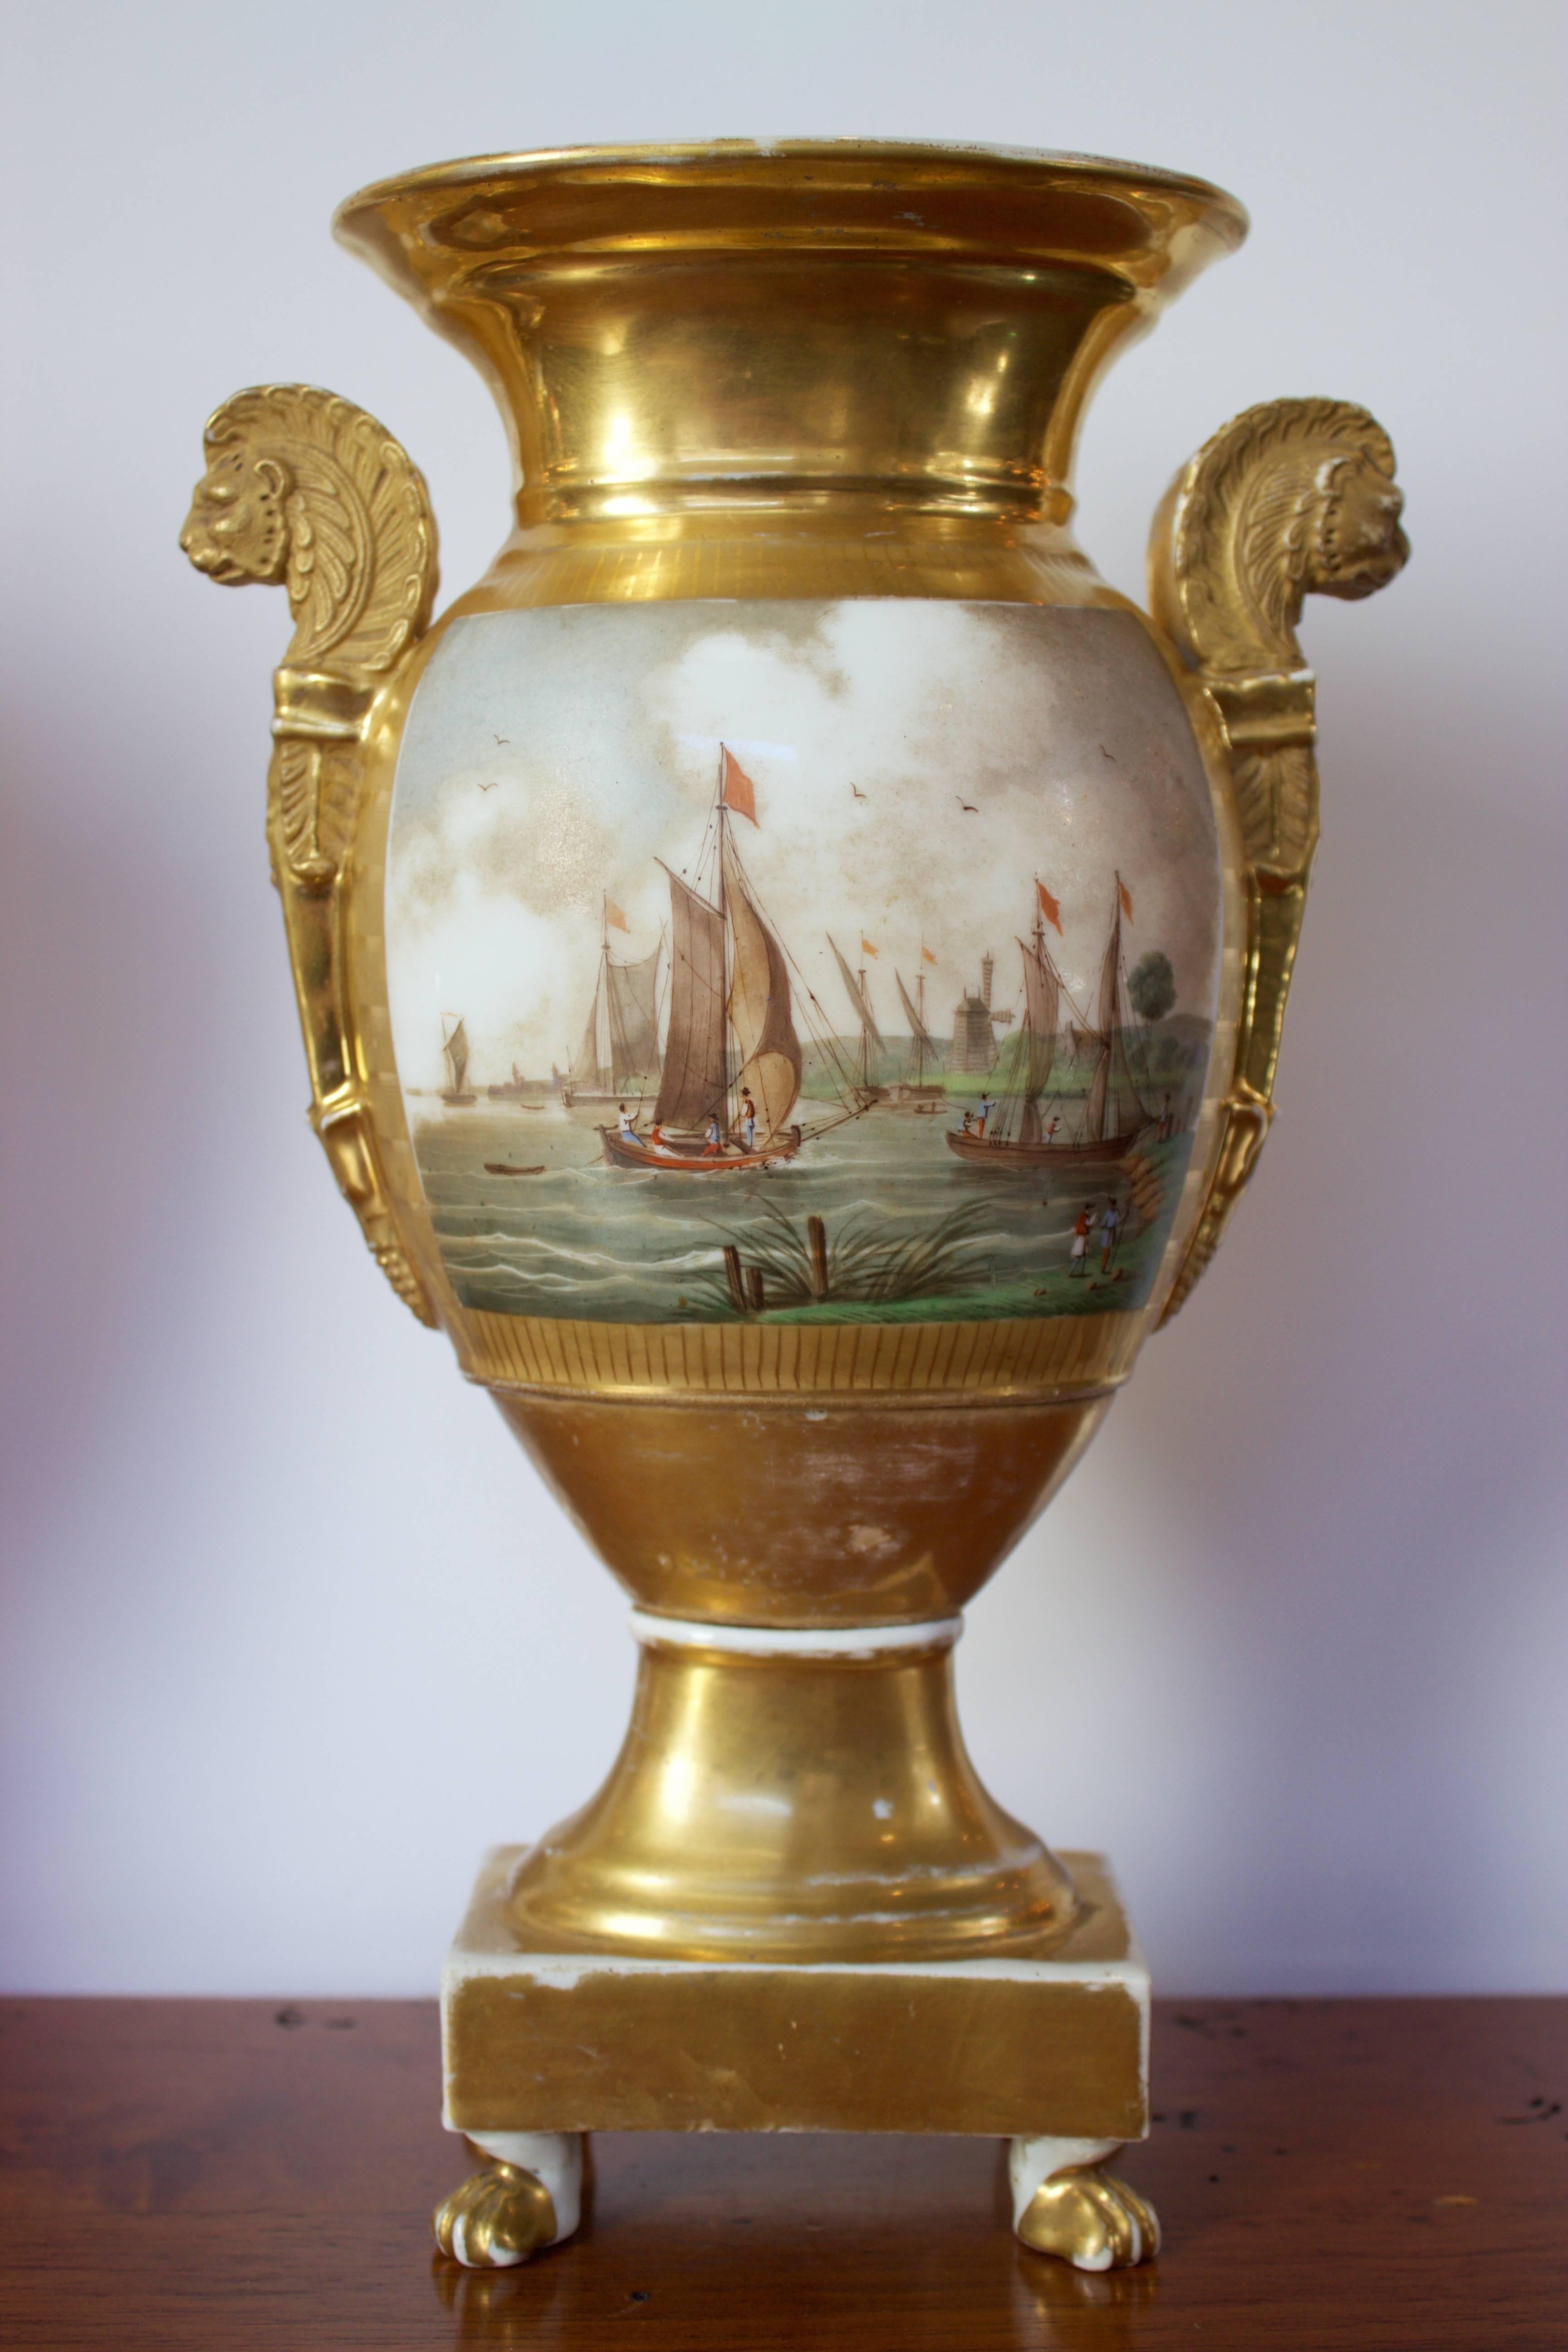 Truly beautiful pair of white porcelain vases from the Empire period .The main face of each vase is decorated by gorgeous hand-painted seascapes representing sailboats on the ocean and near the coast. These large painted cartouches are outlined by